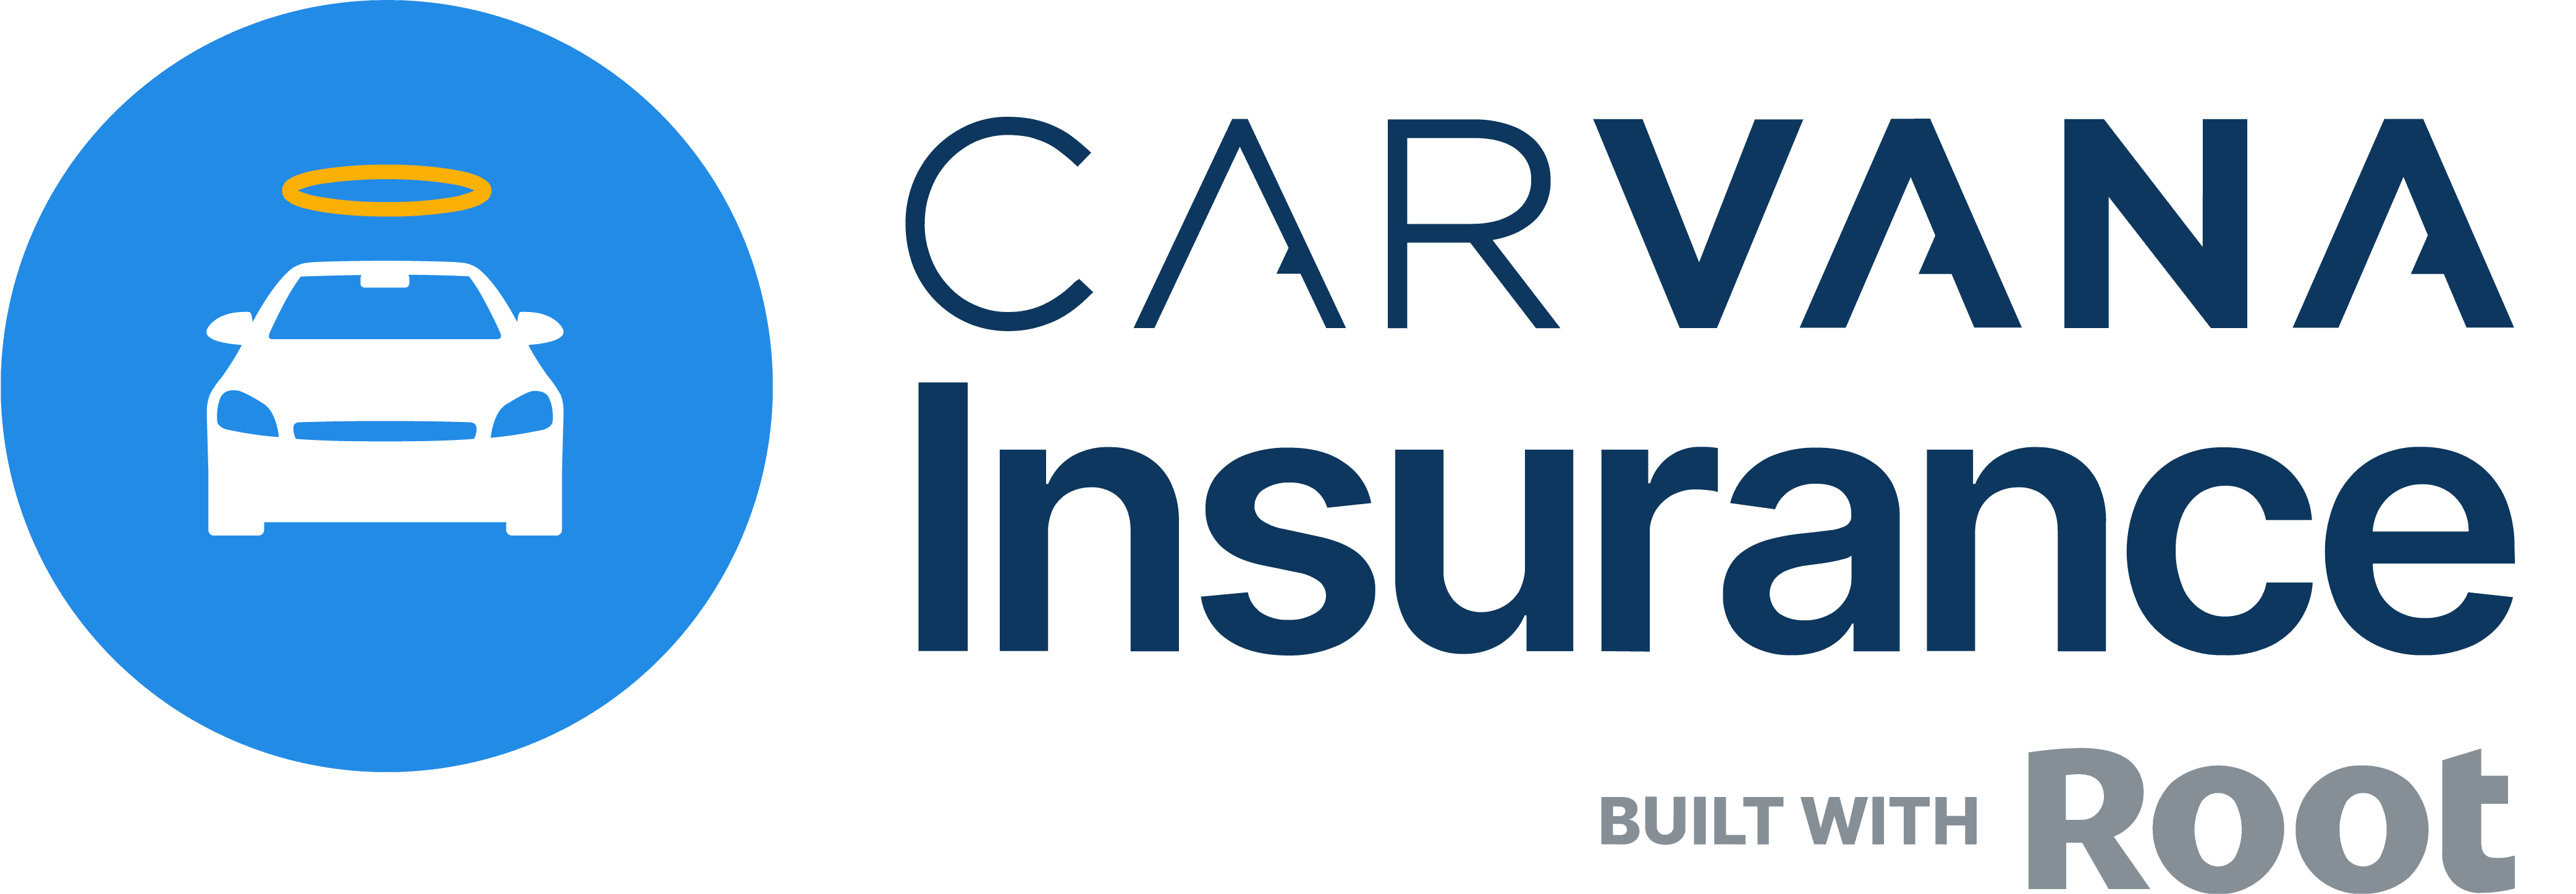 Carvana Insurance built with Root